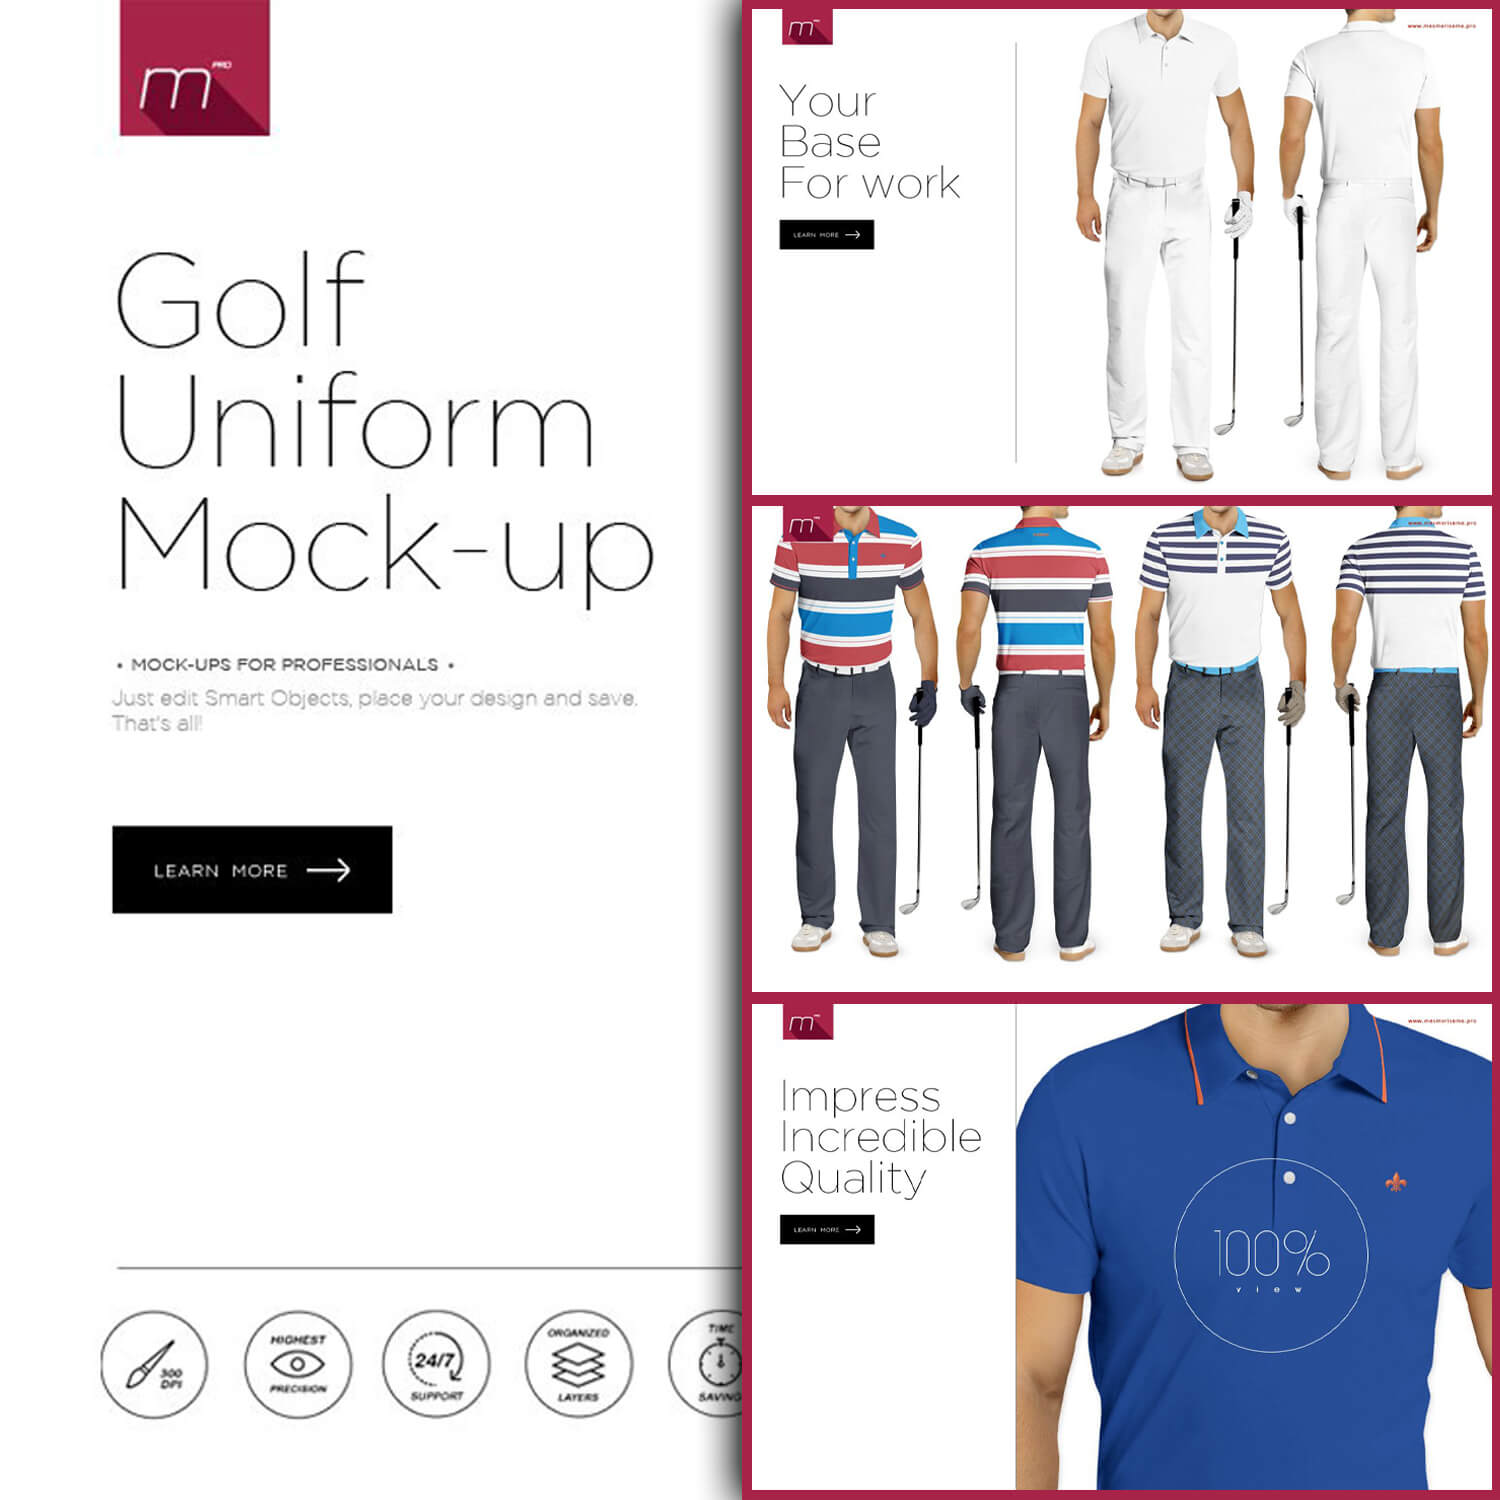 An image of all possible options for men's golf uniforms.